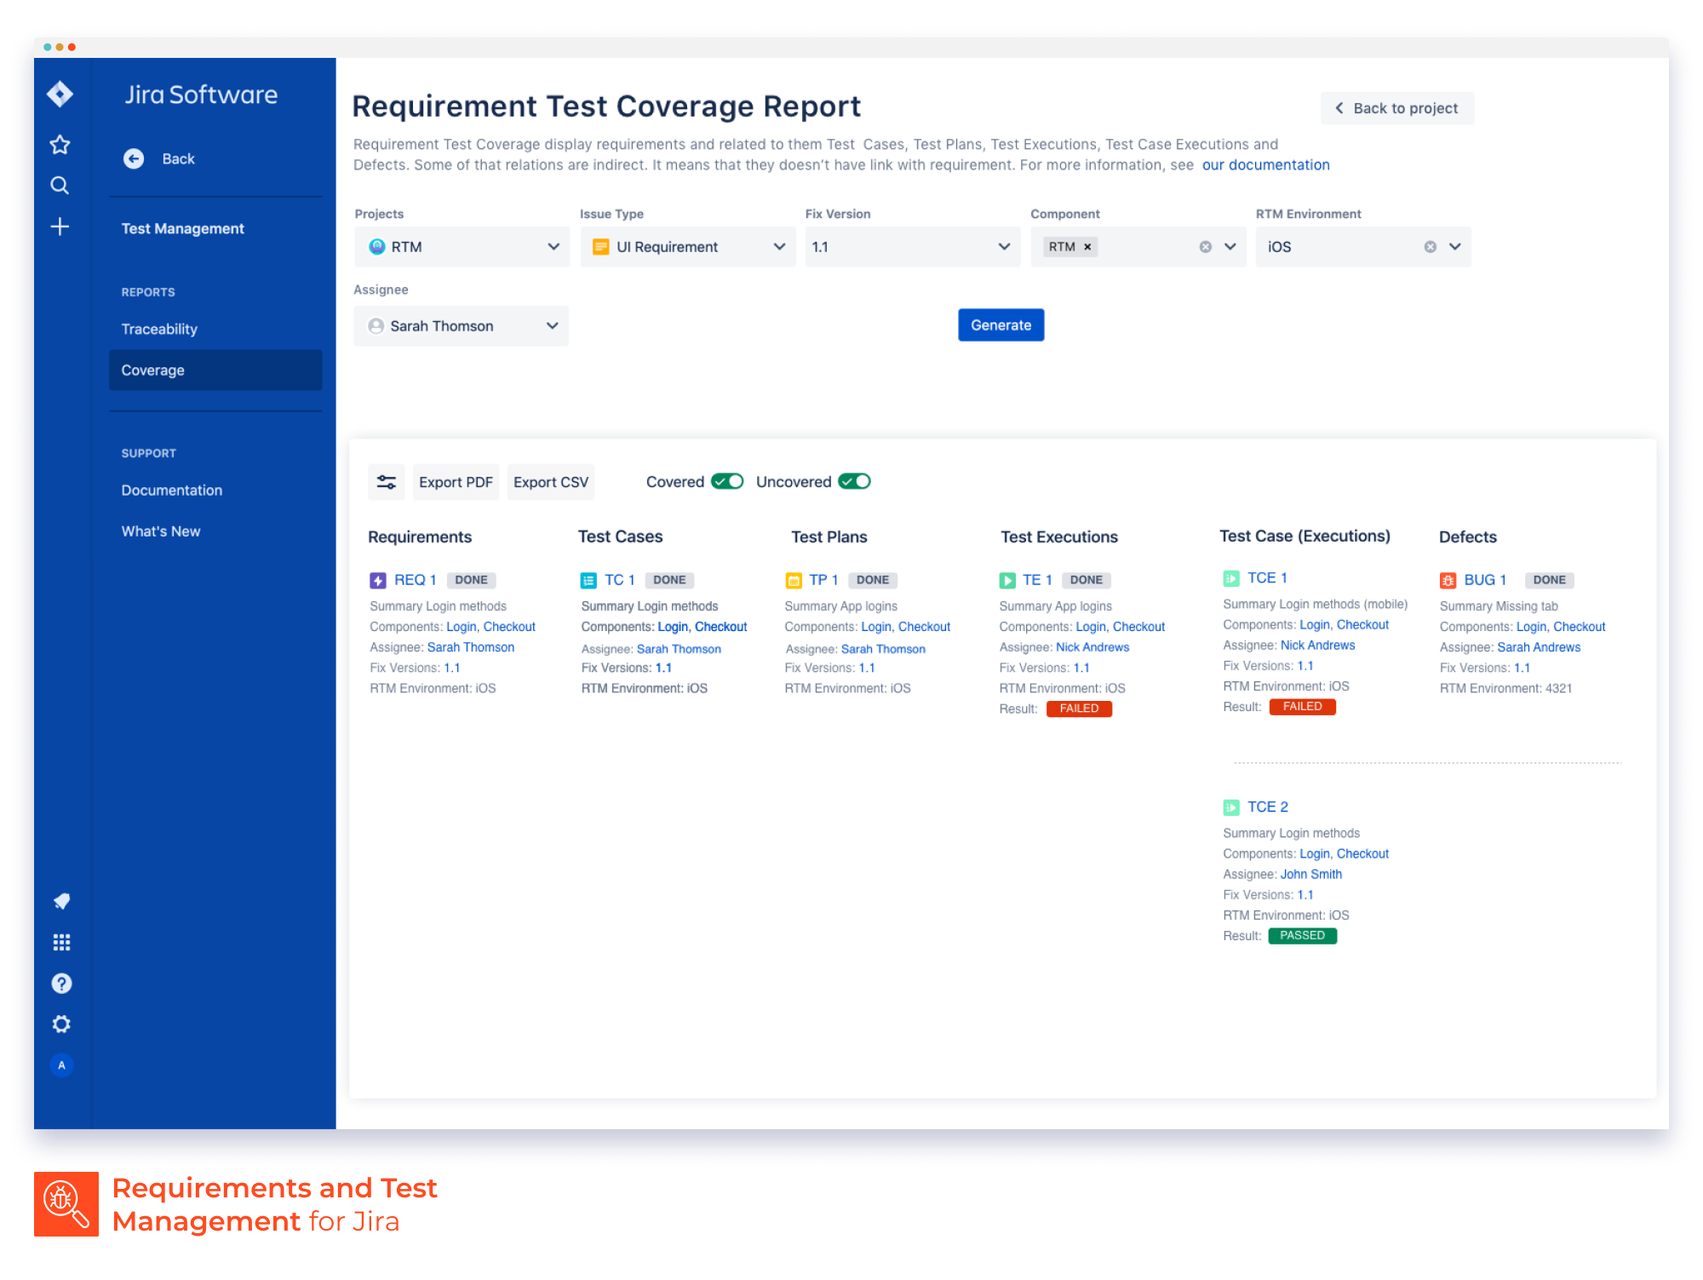 The Requirement coverage report screen